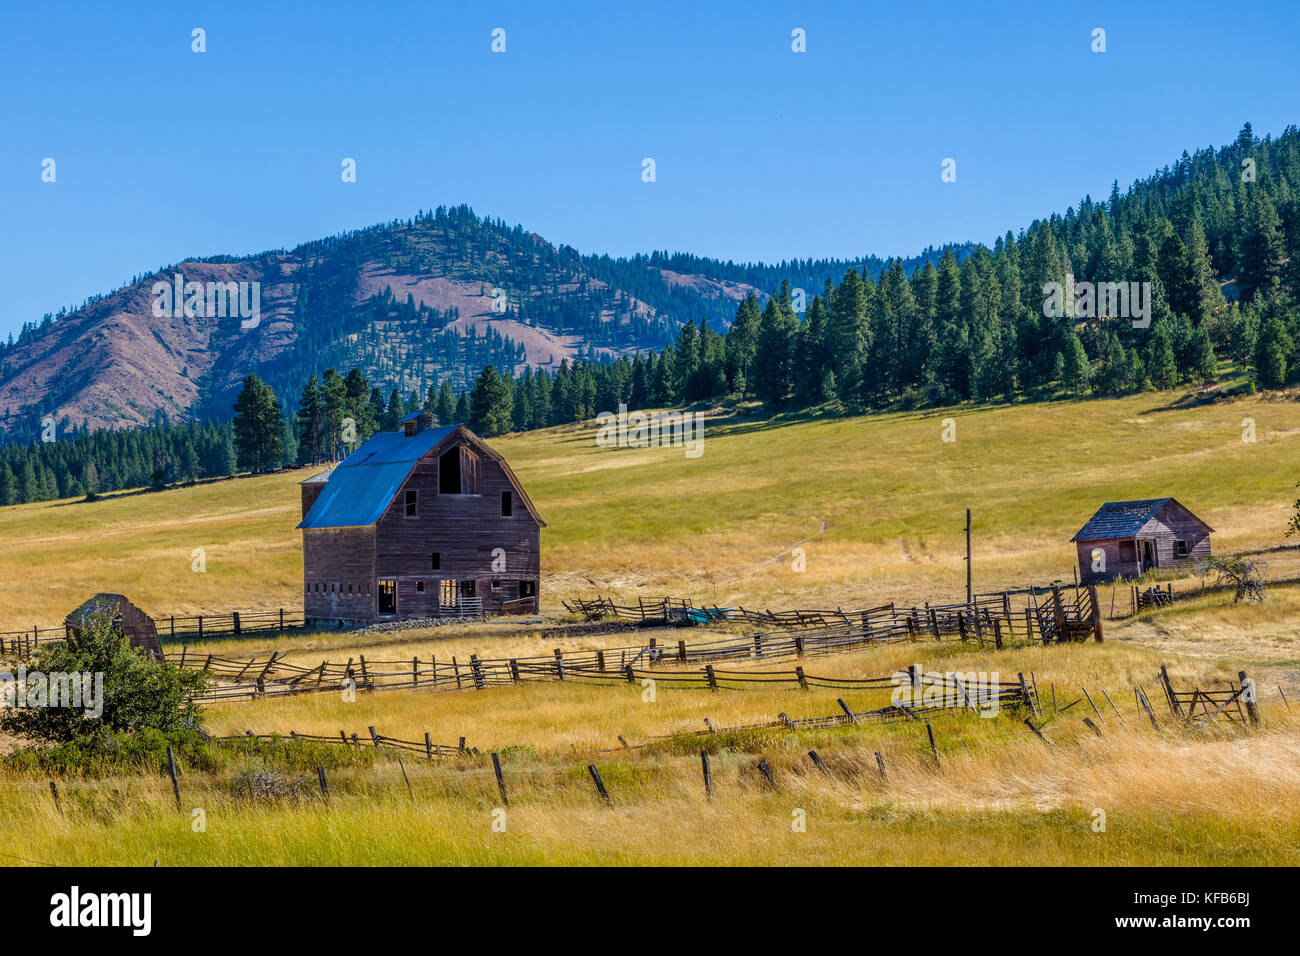 Old barn along Rt 97 in north western Washington State in the United States Stock Photo